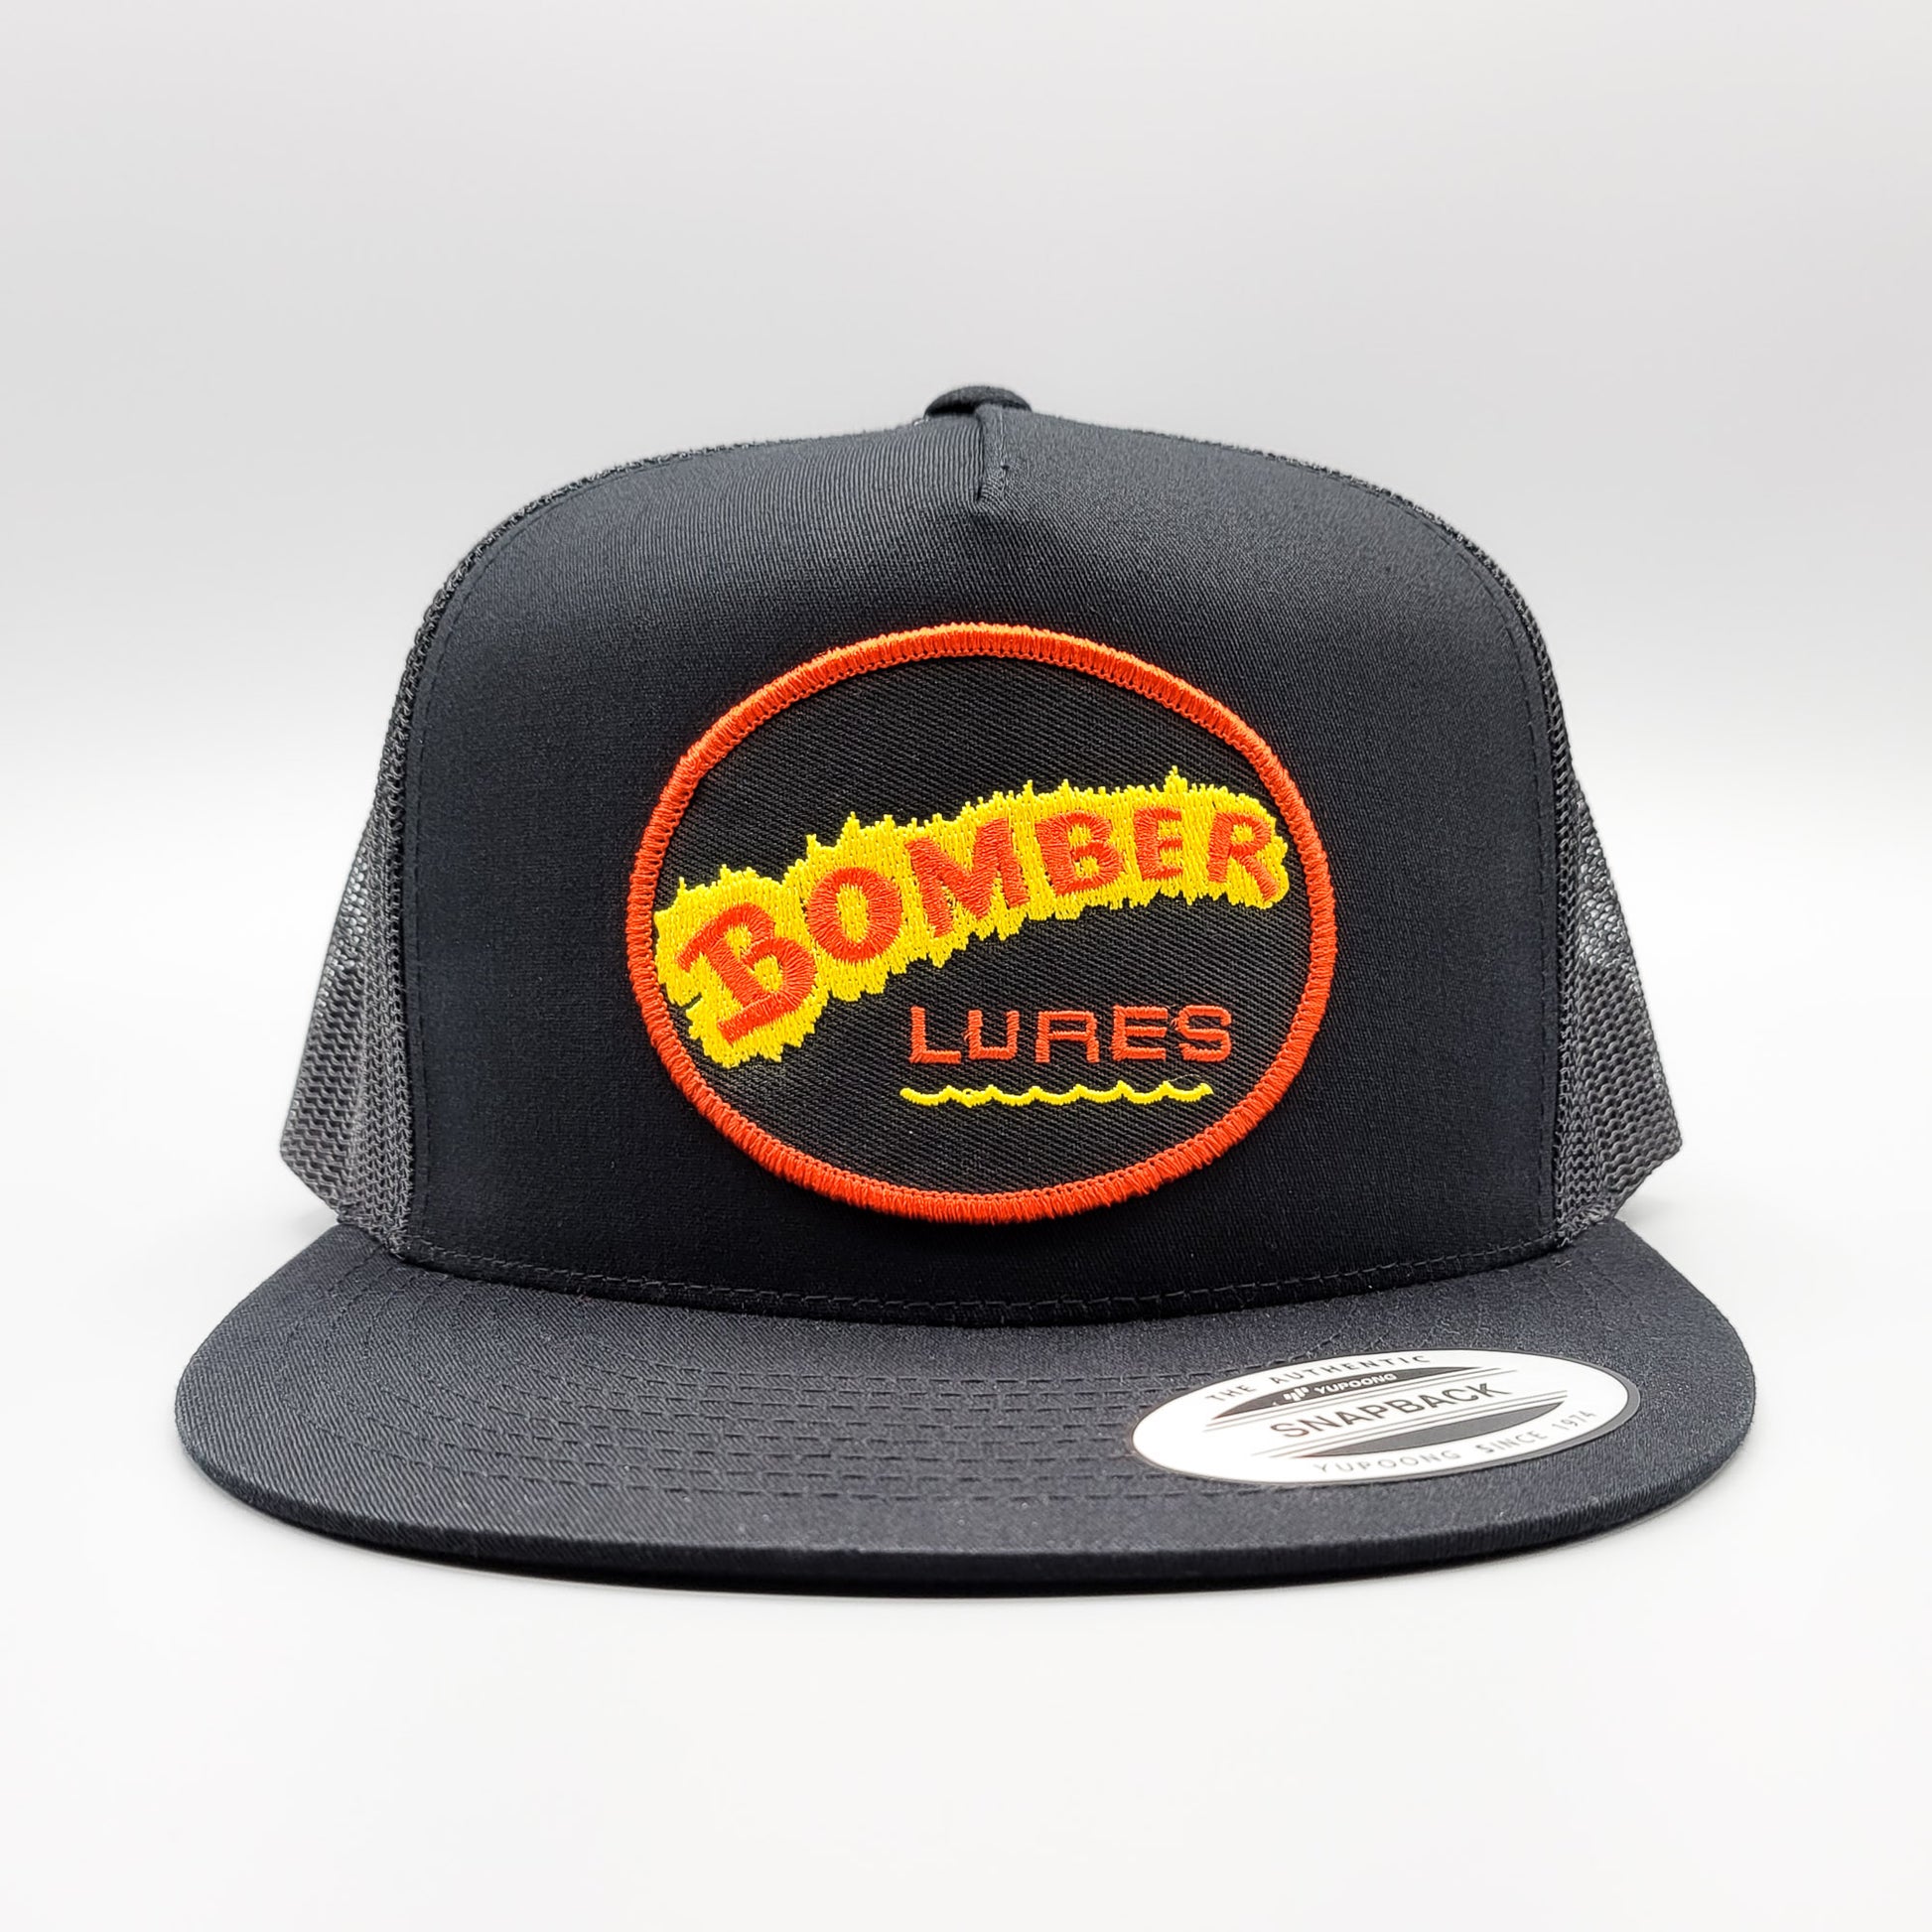 Bomber Lures - Who wants to see this old-school hat come back